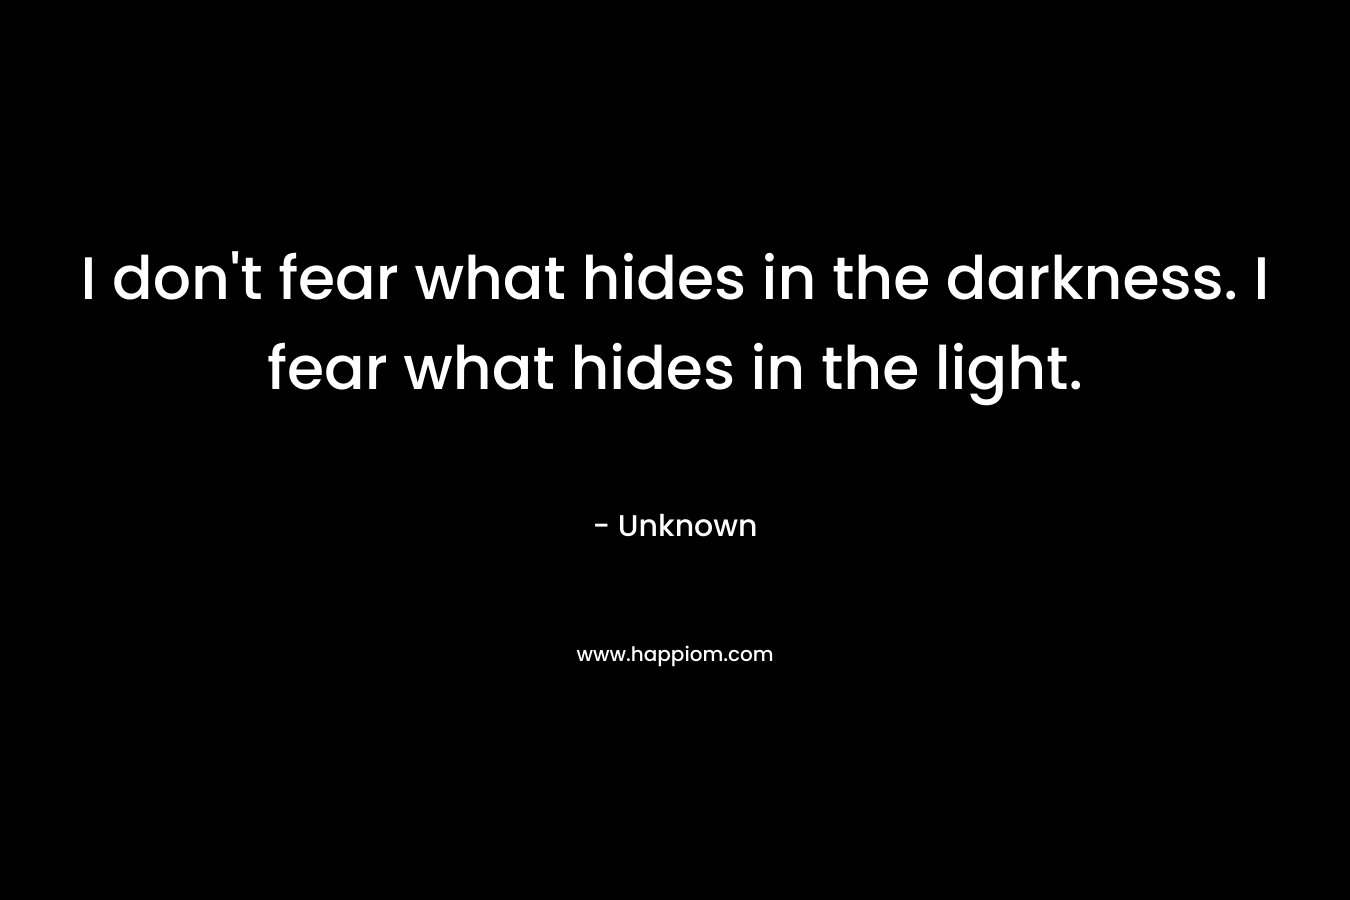 I don't fear what hides in the darkness. I fear what hides in the light.